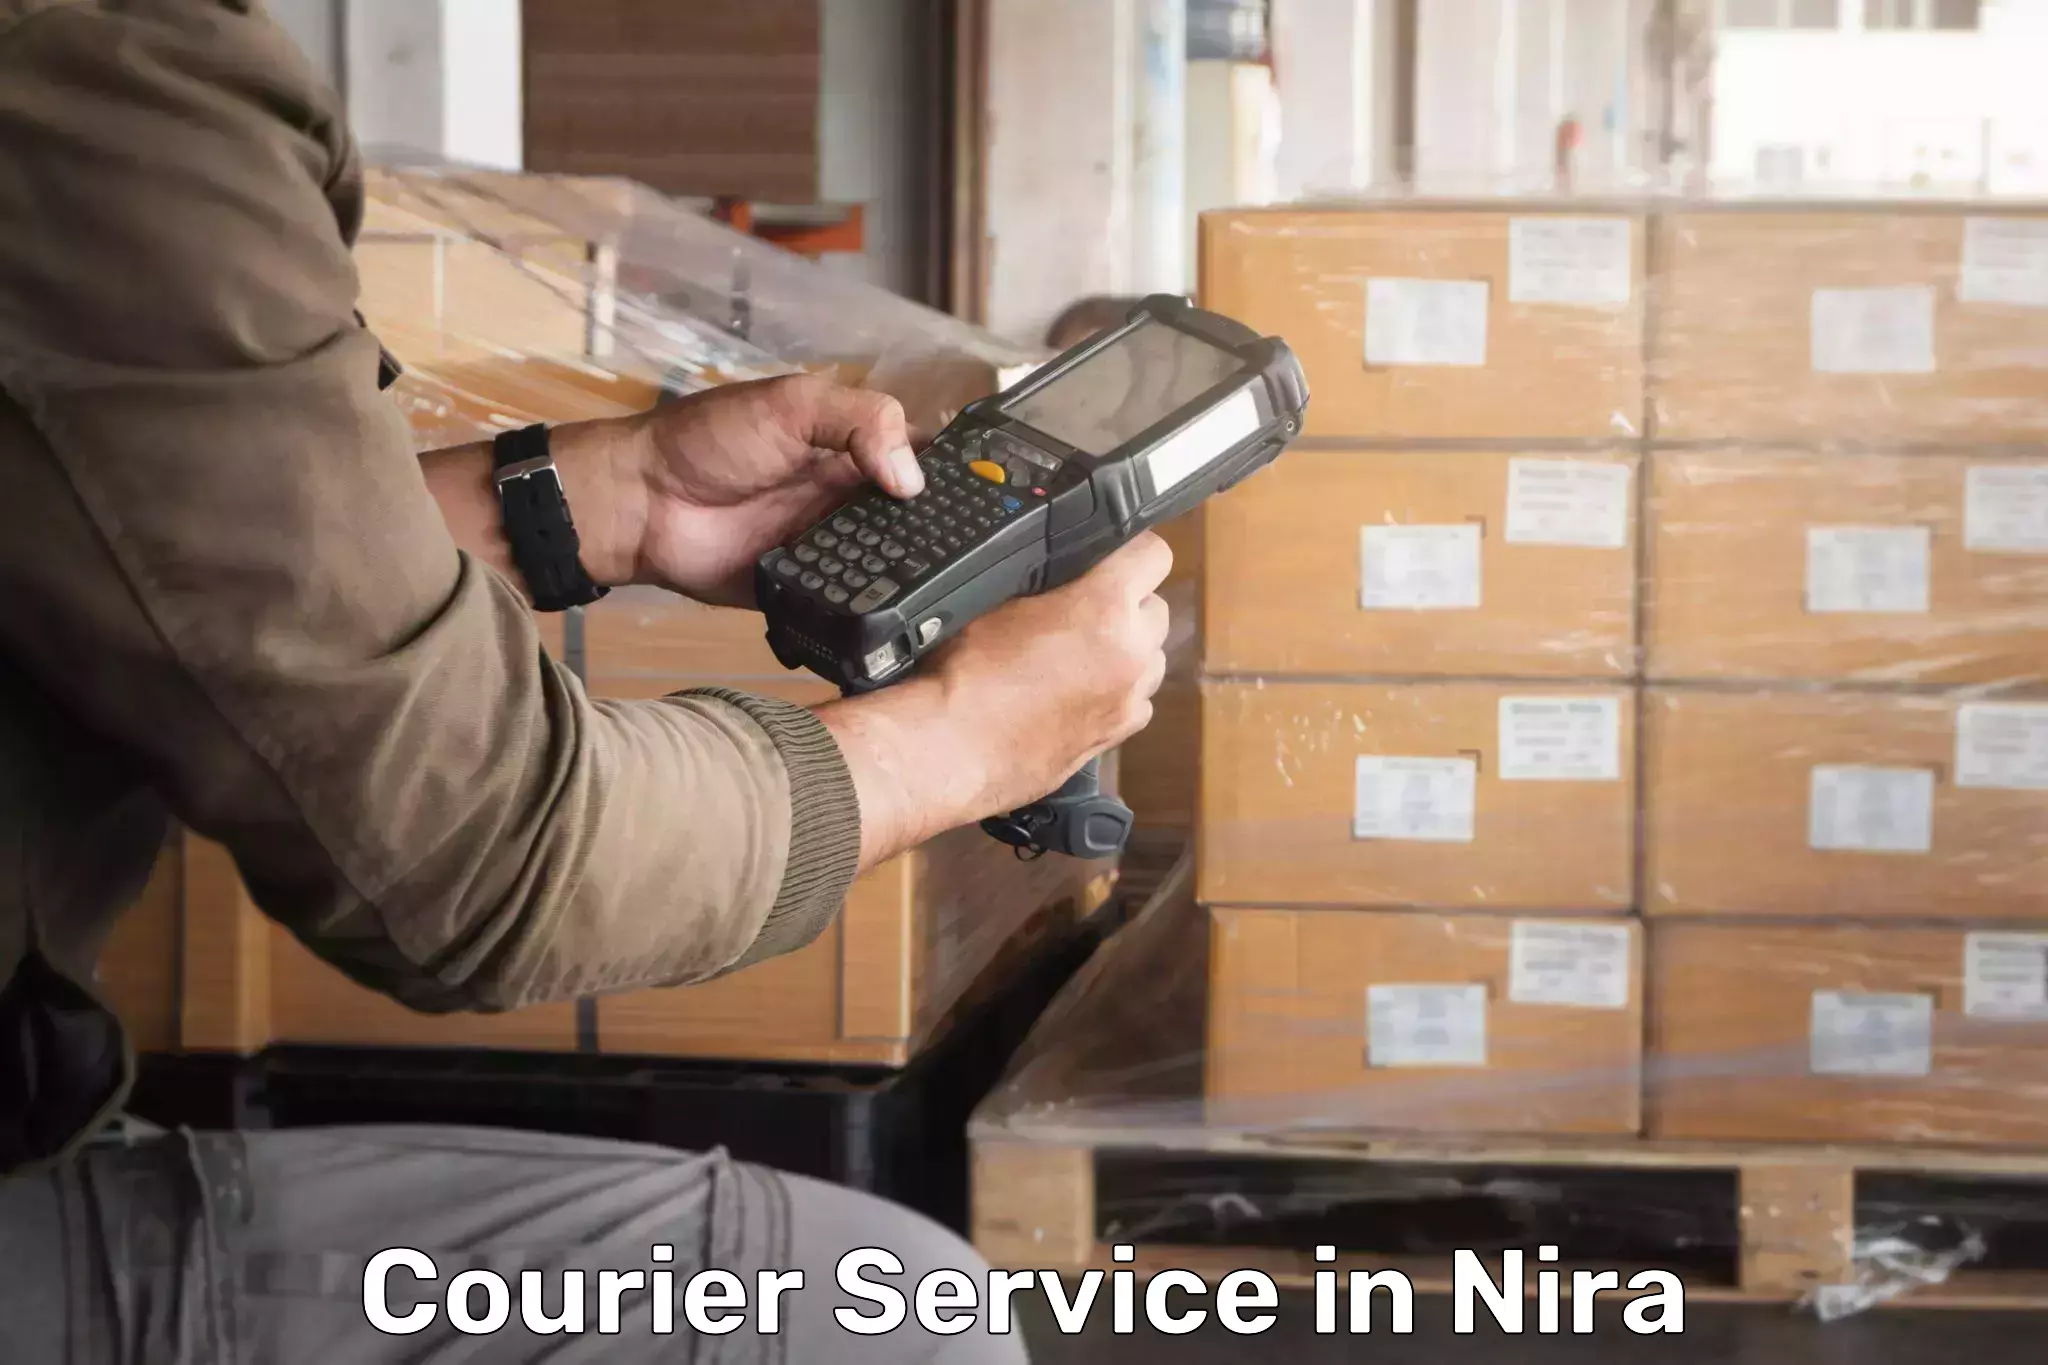 Parcel delivery automation in Nira